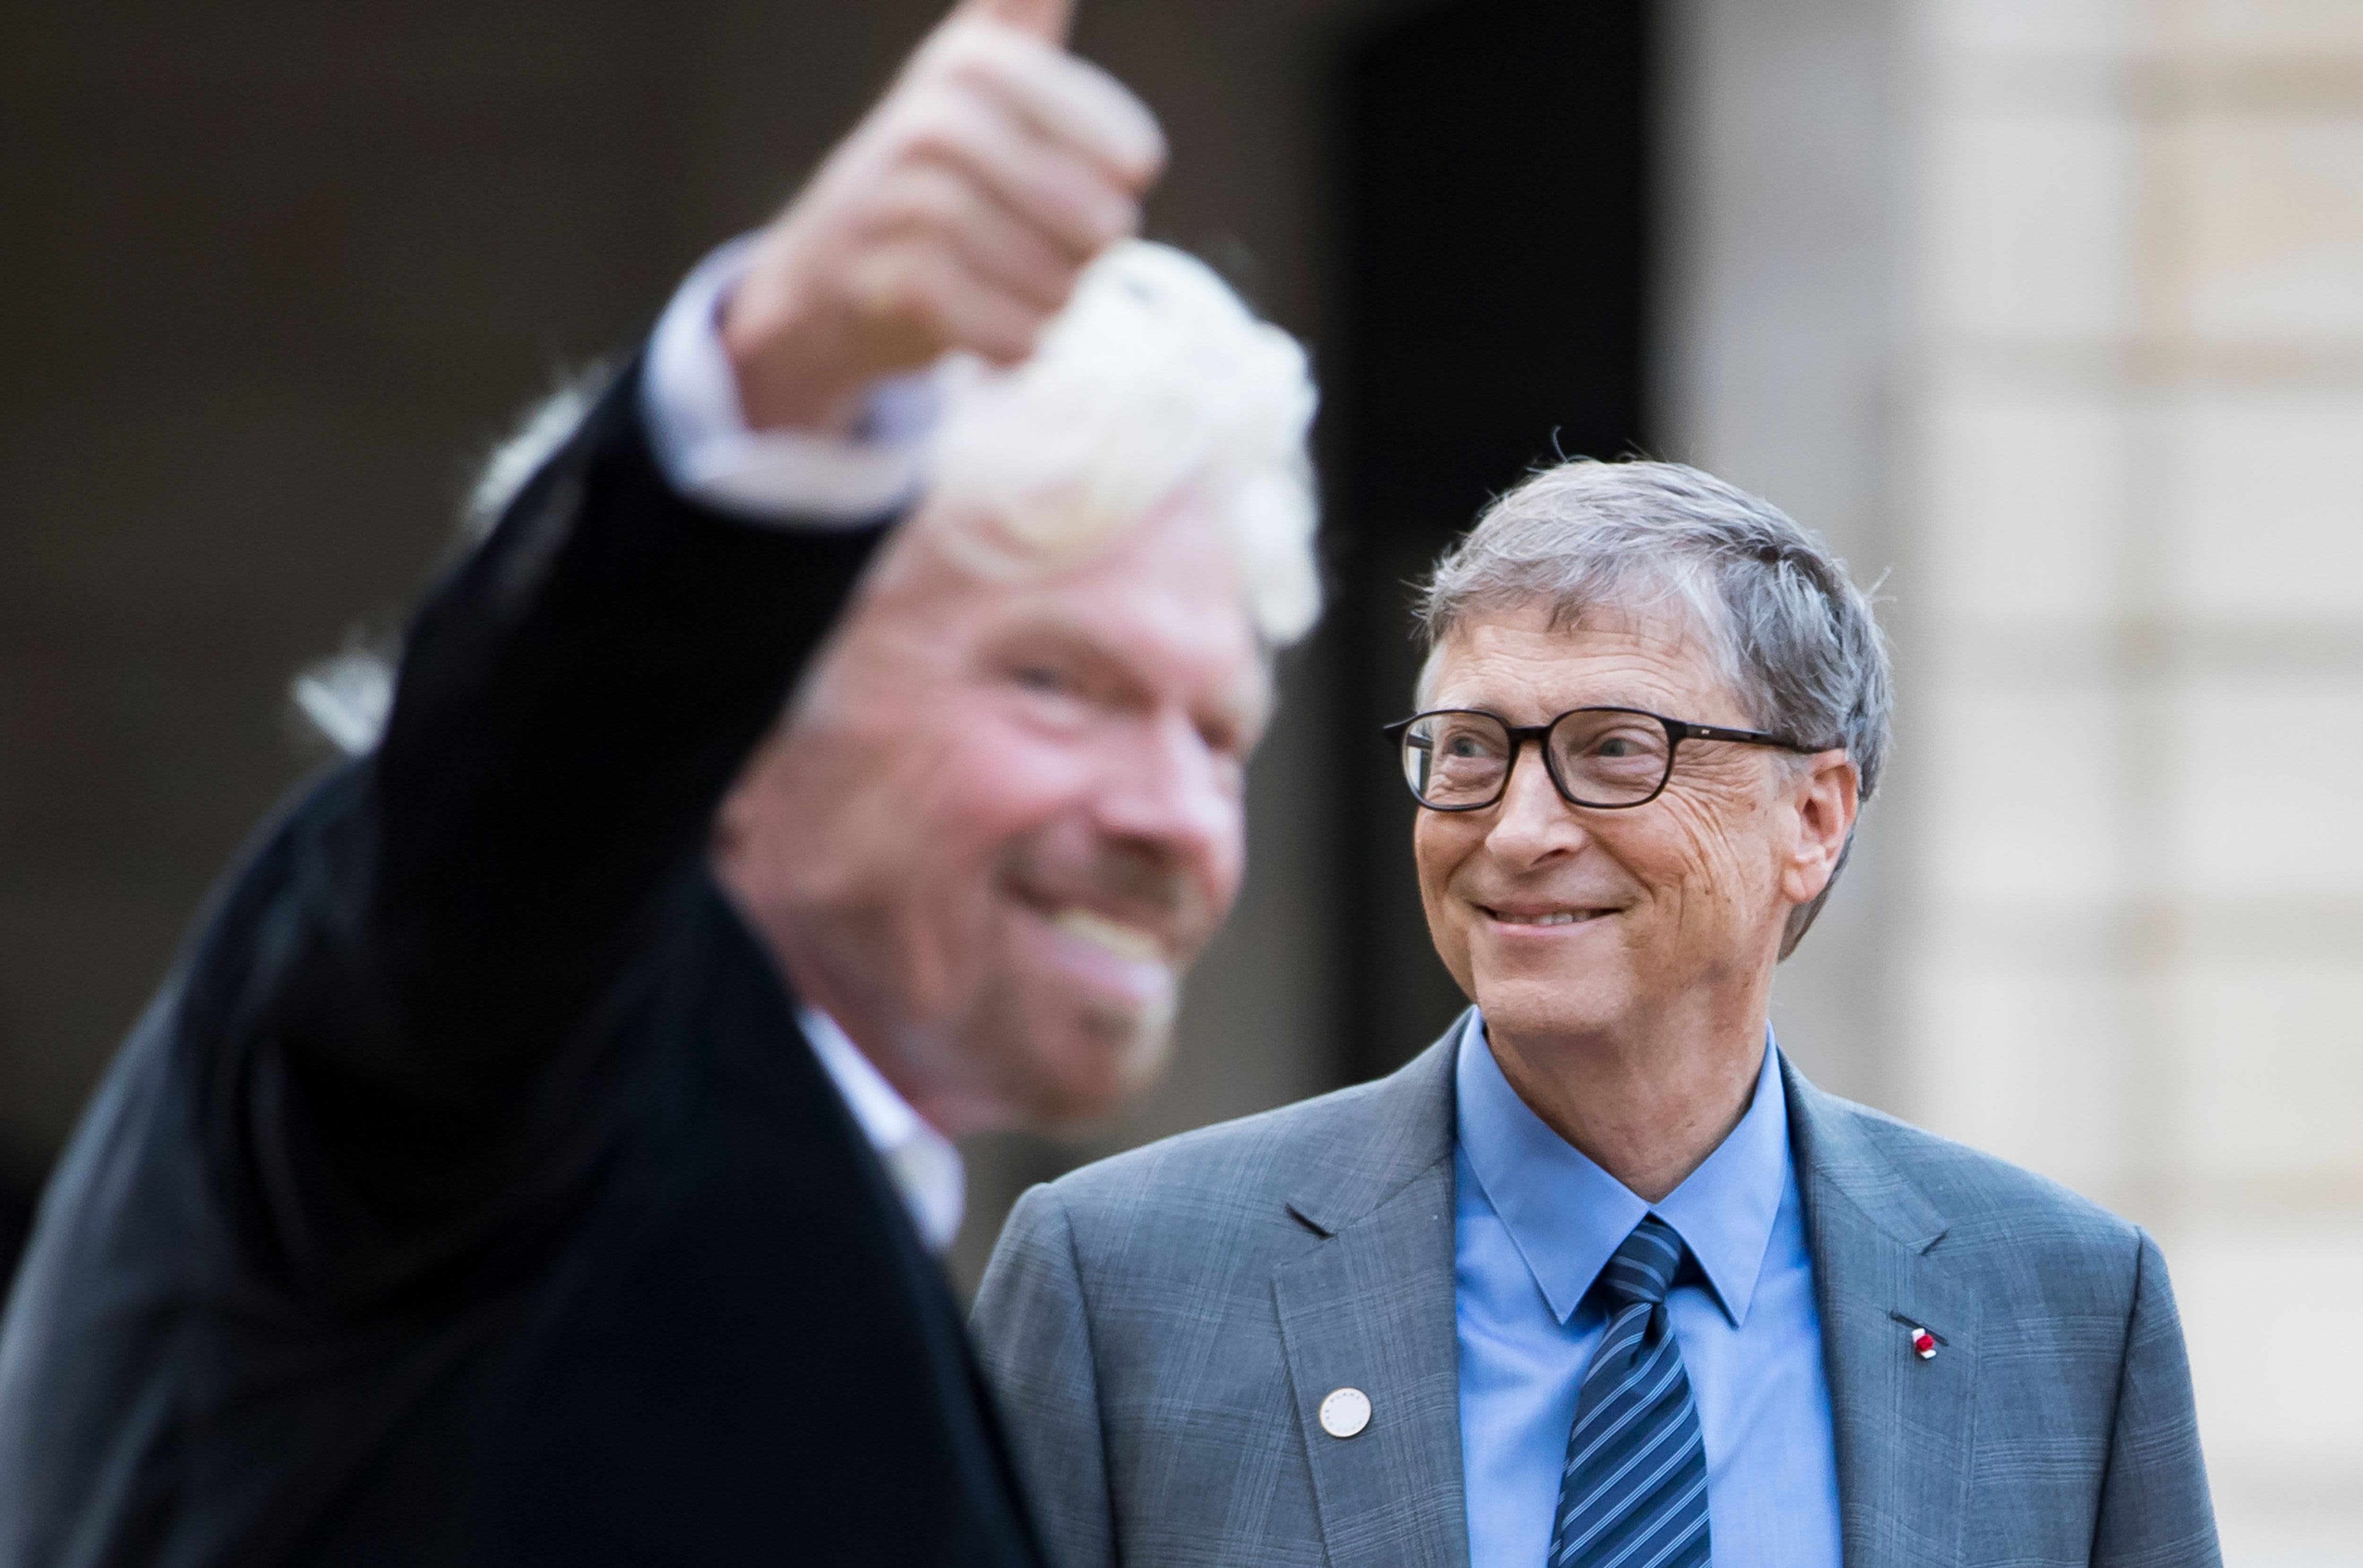 Bill Gates and Richard Branson agree this is one way billionaires can help counter climate change - CNBC